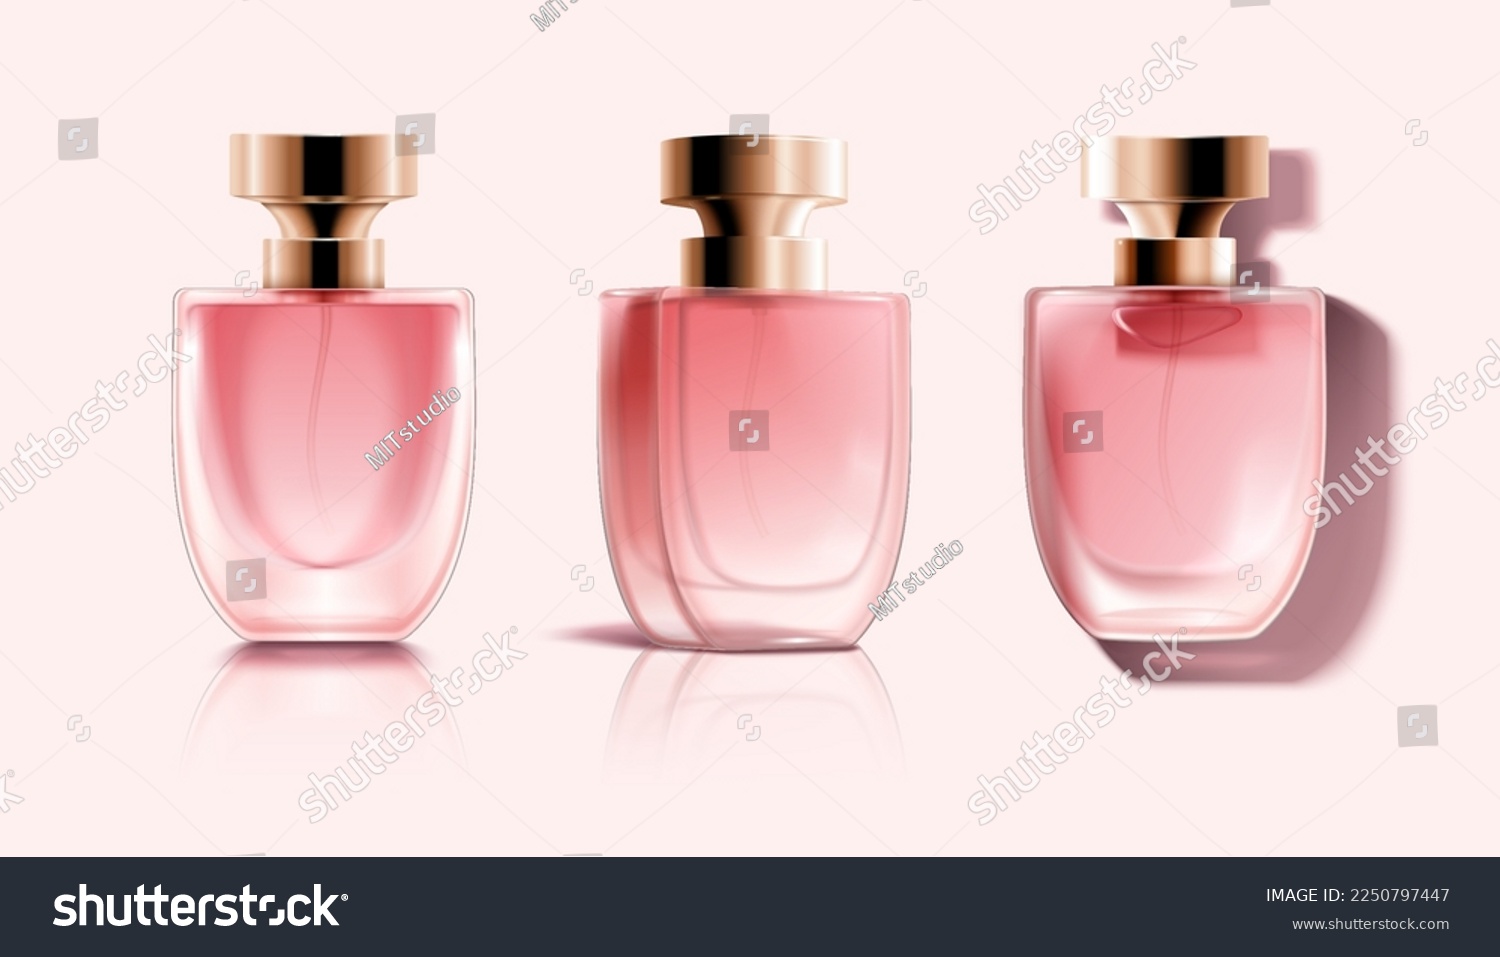 SVG of 3D Perfume glass bottle mockup. Pink transparent perfume spray glass bottles with bronze caps isolated on light pink background. svg